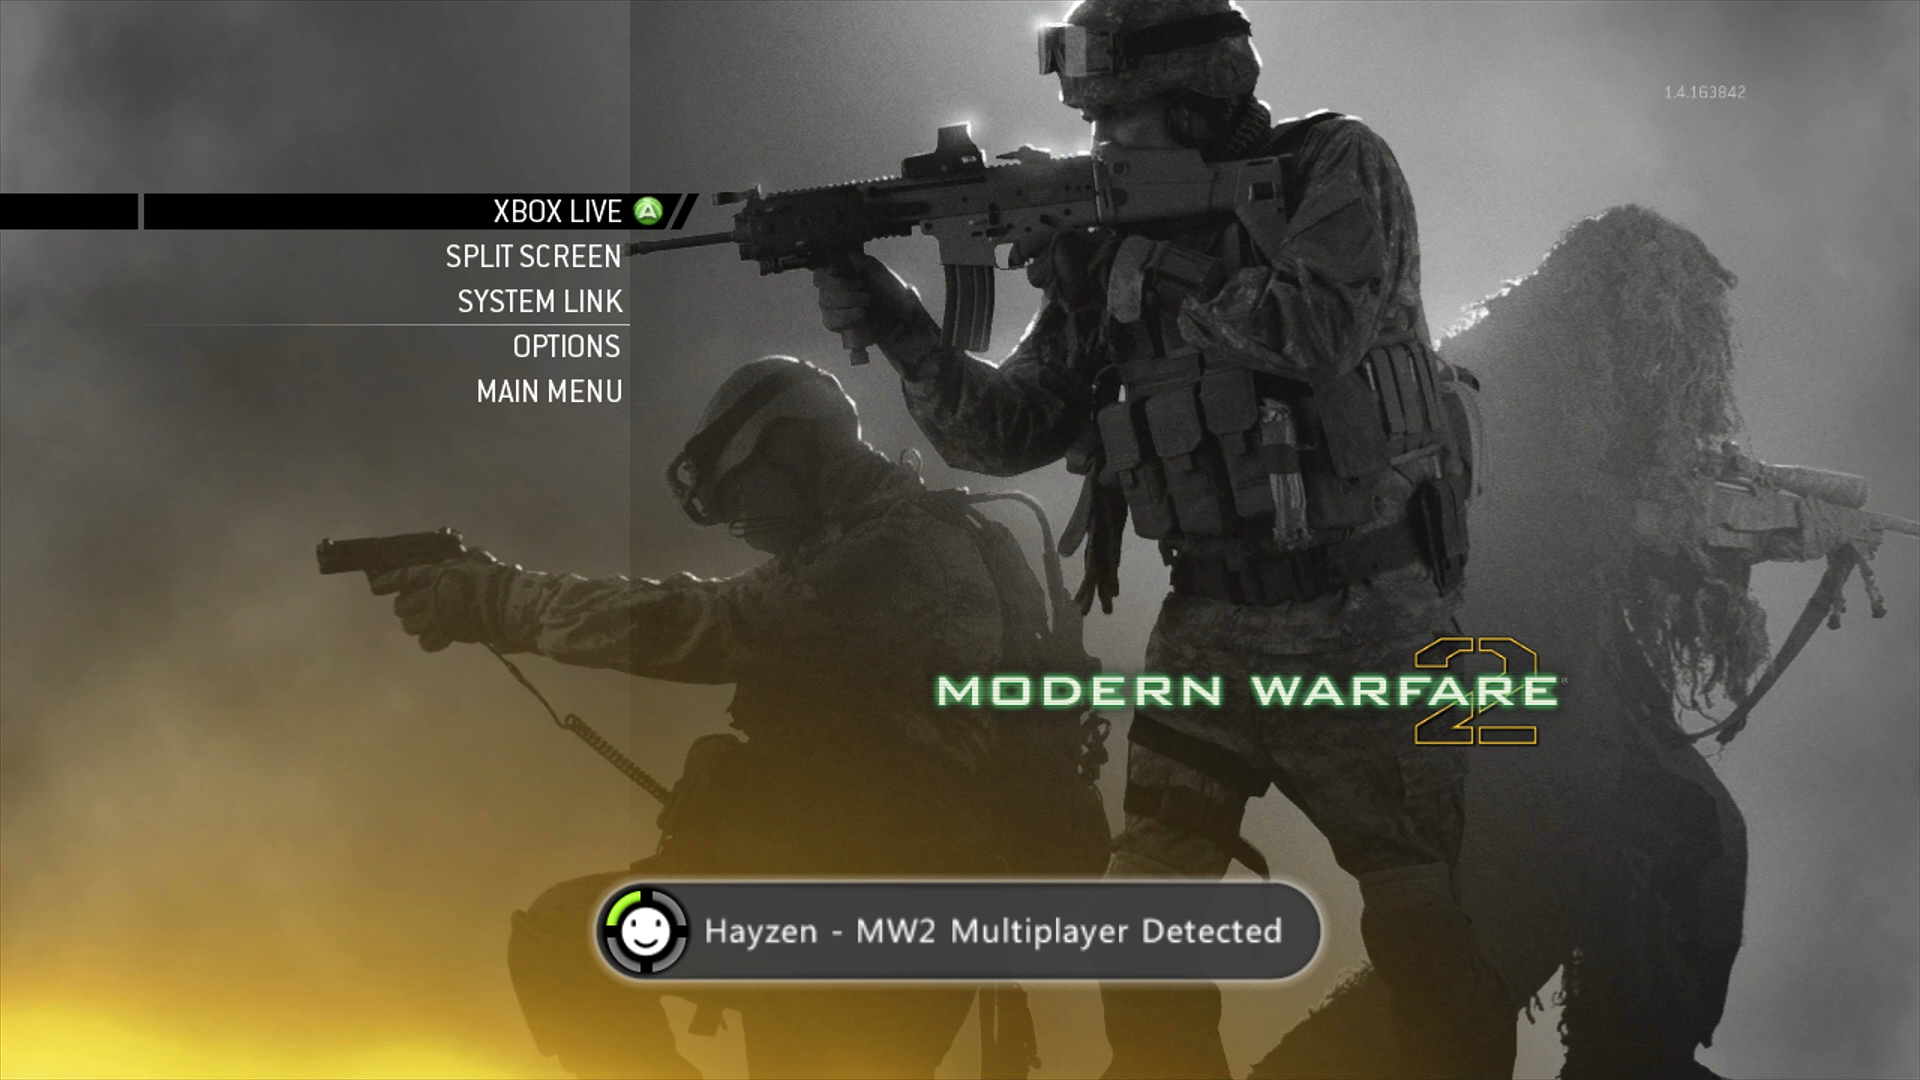 MW2 Multiplayer Detected